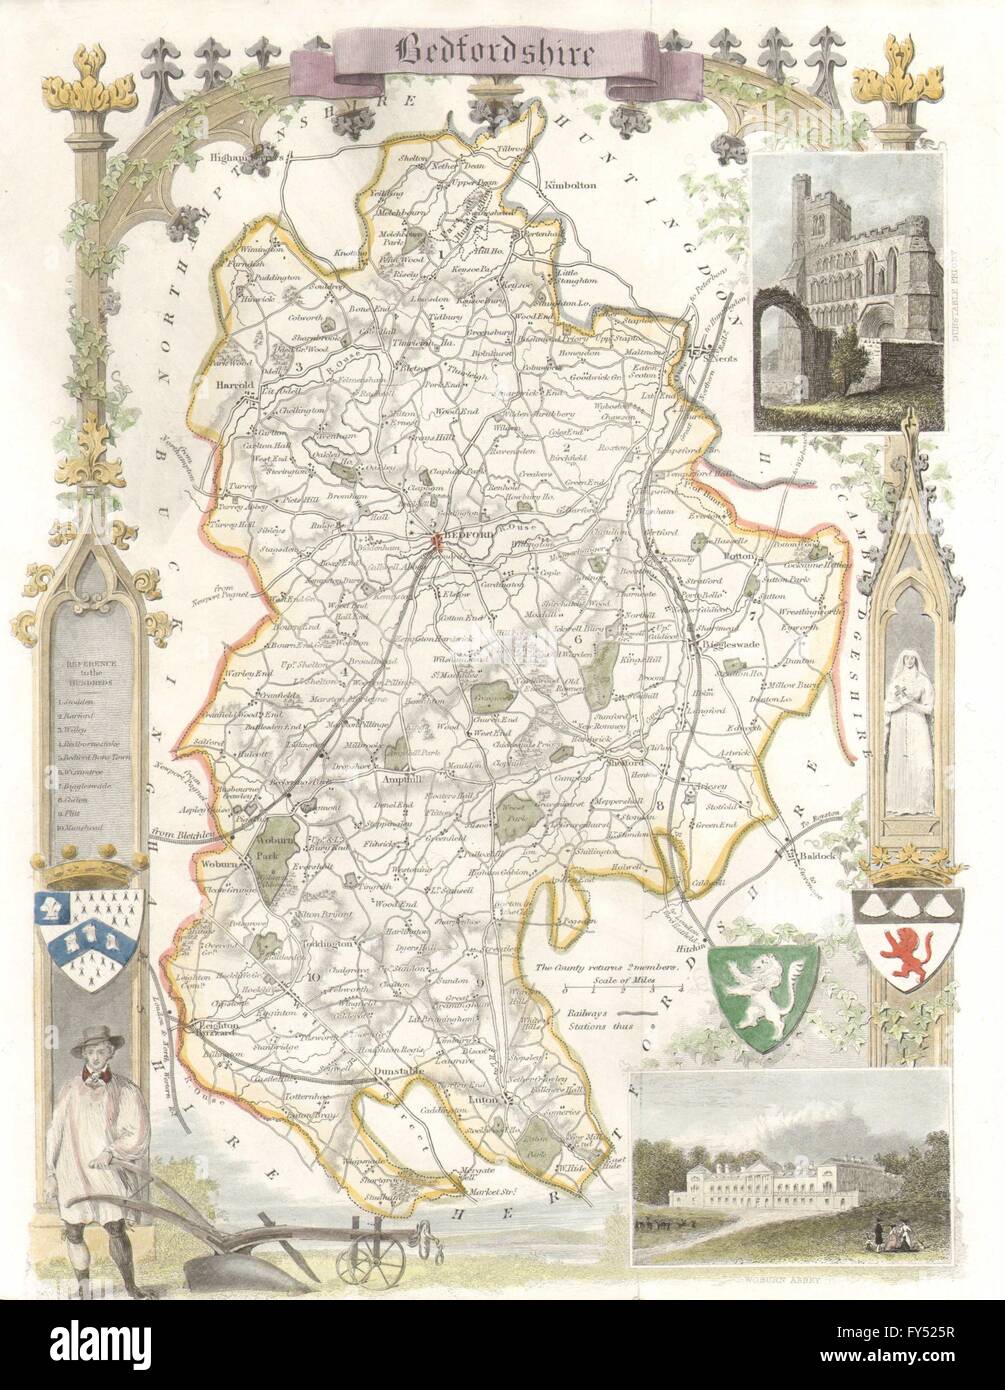 Bedfordshire antique hand-coloured county map by Thomas Moule, c1840 Stock Photo